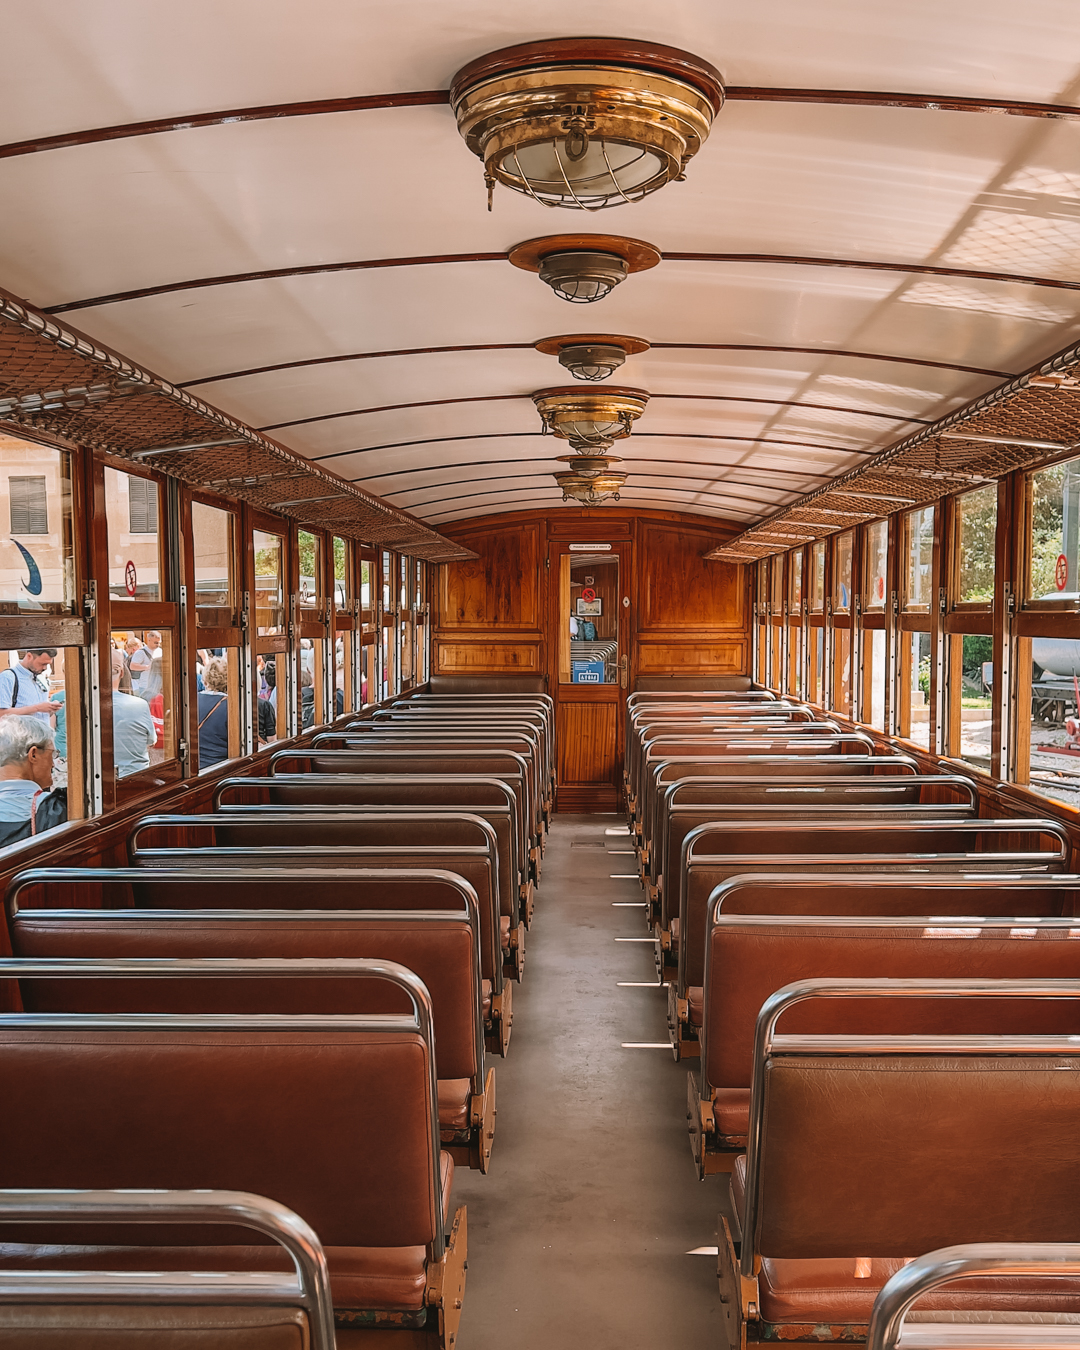 Take the vintage train to Soller